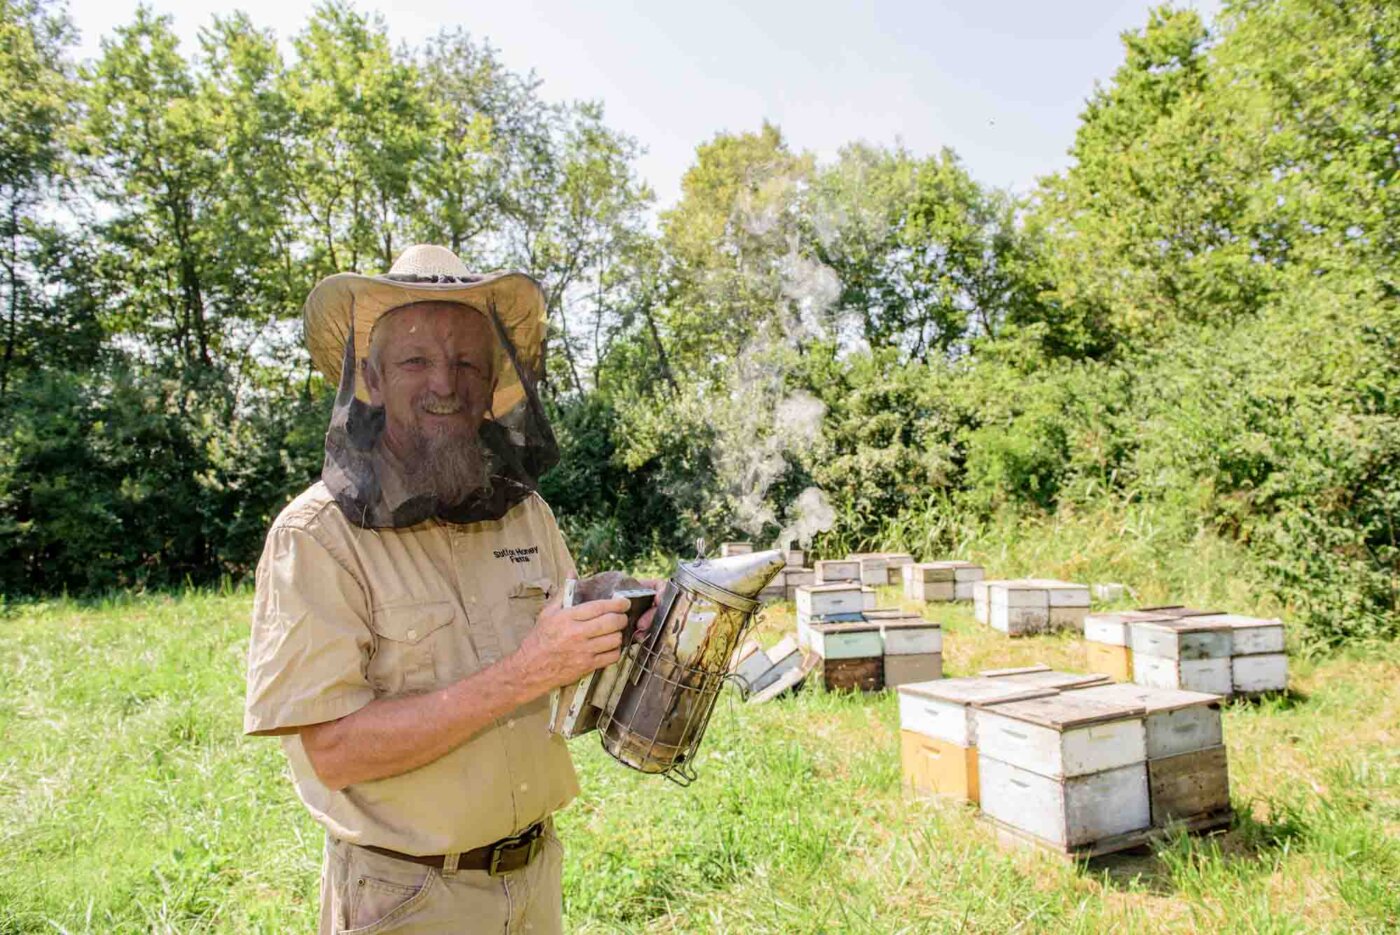 Rick Sutton, owner of Sutton Honey Farms in Lancaster, Ky., visits a bee yard near the radio towers and satellite dishes of the Hometown Radio Network, Tuesday, Sept. 8, 2020 outside Danville, Ky. (Photo by Brian Bohannon)